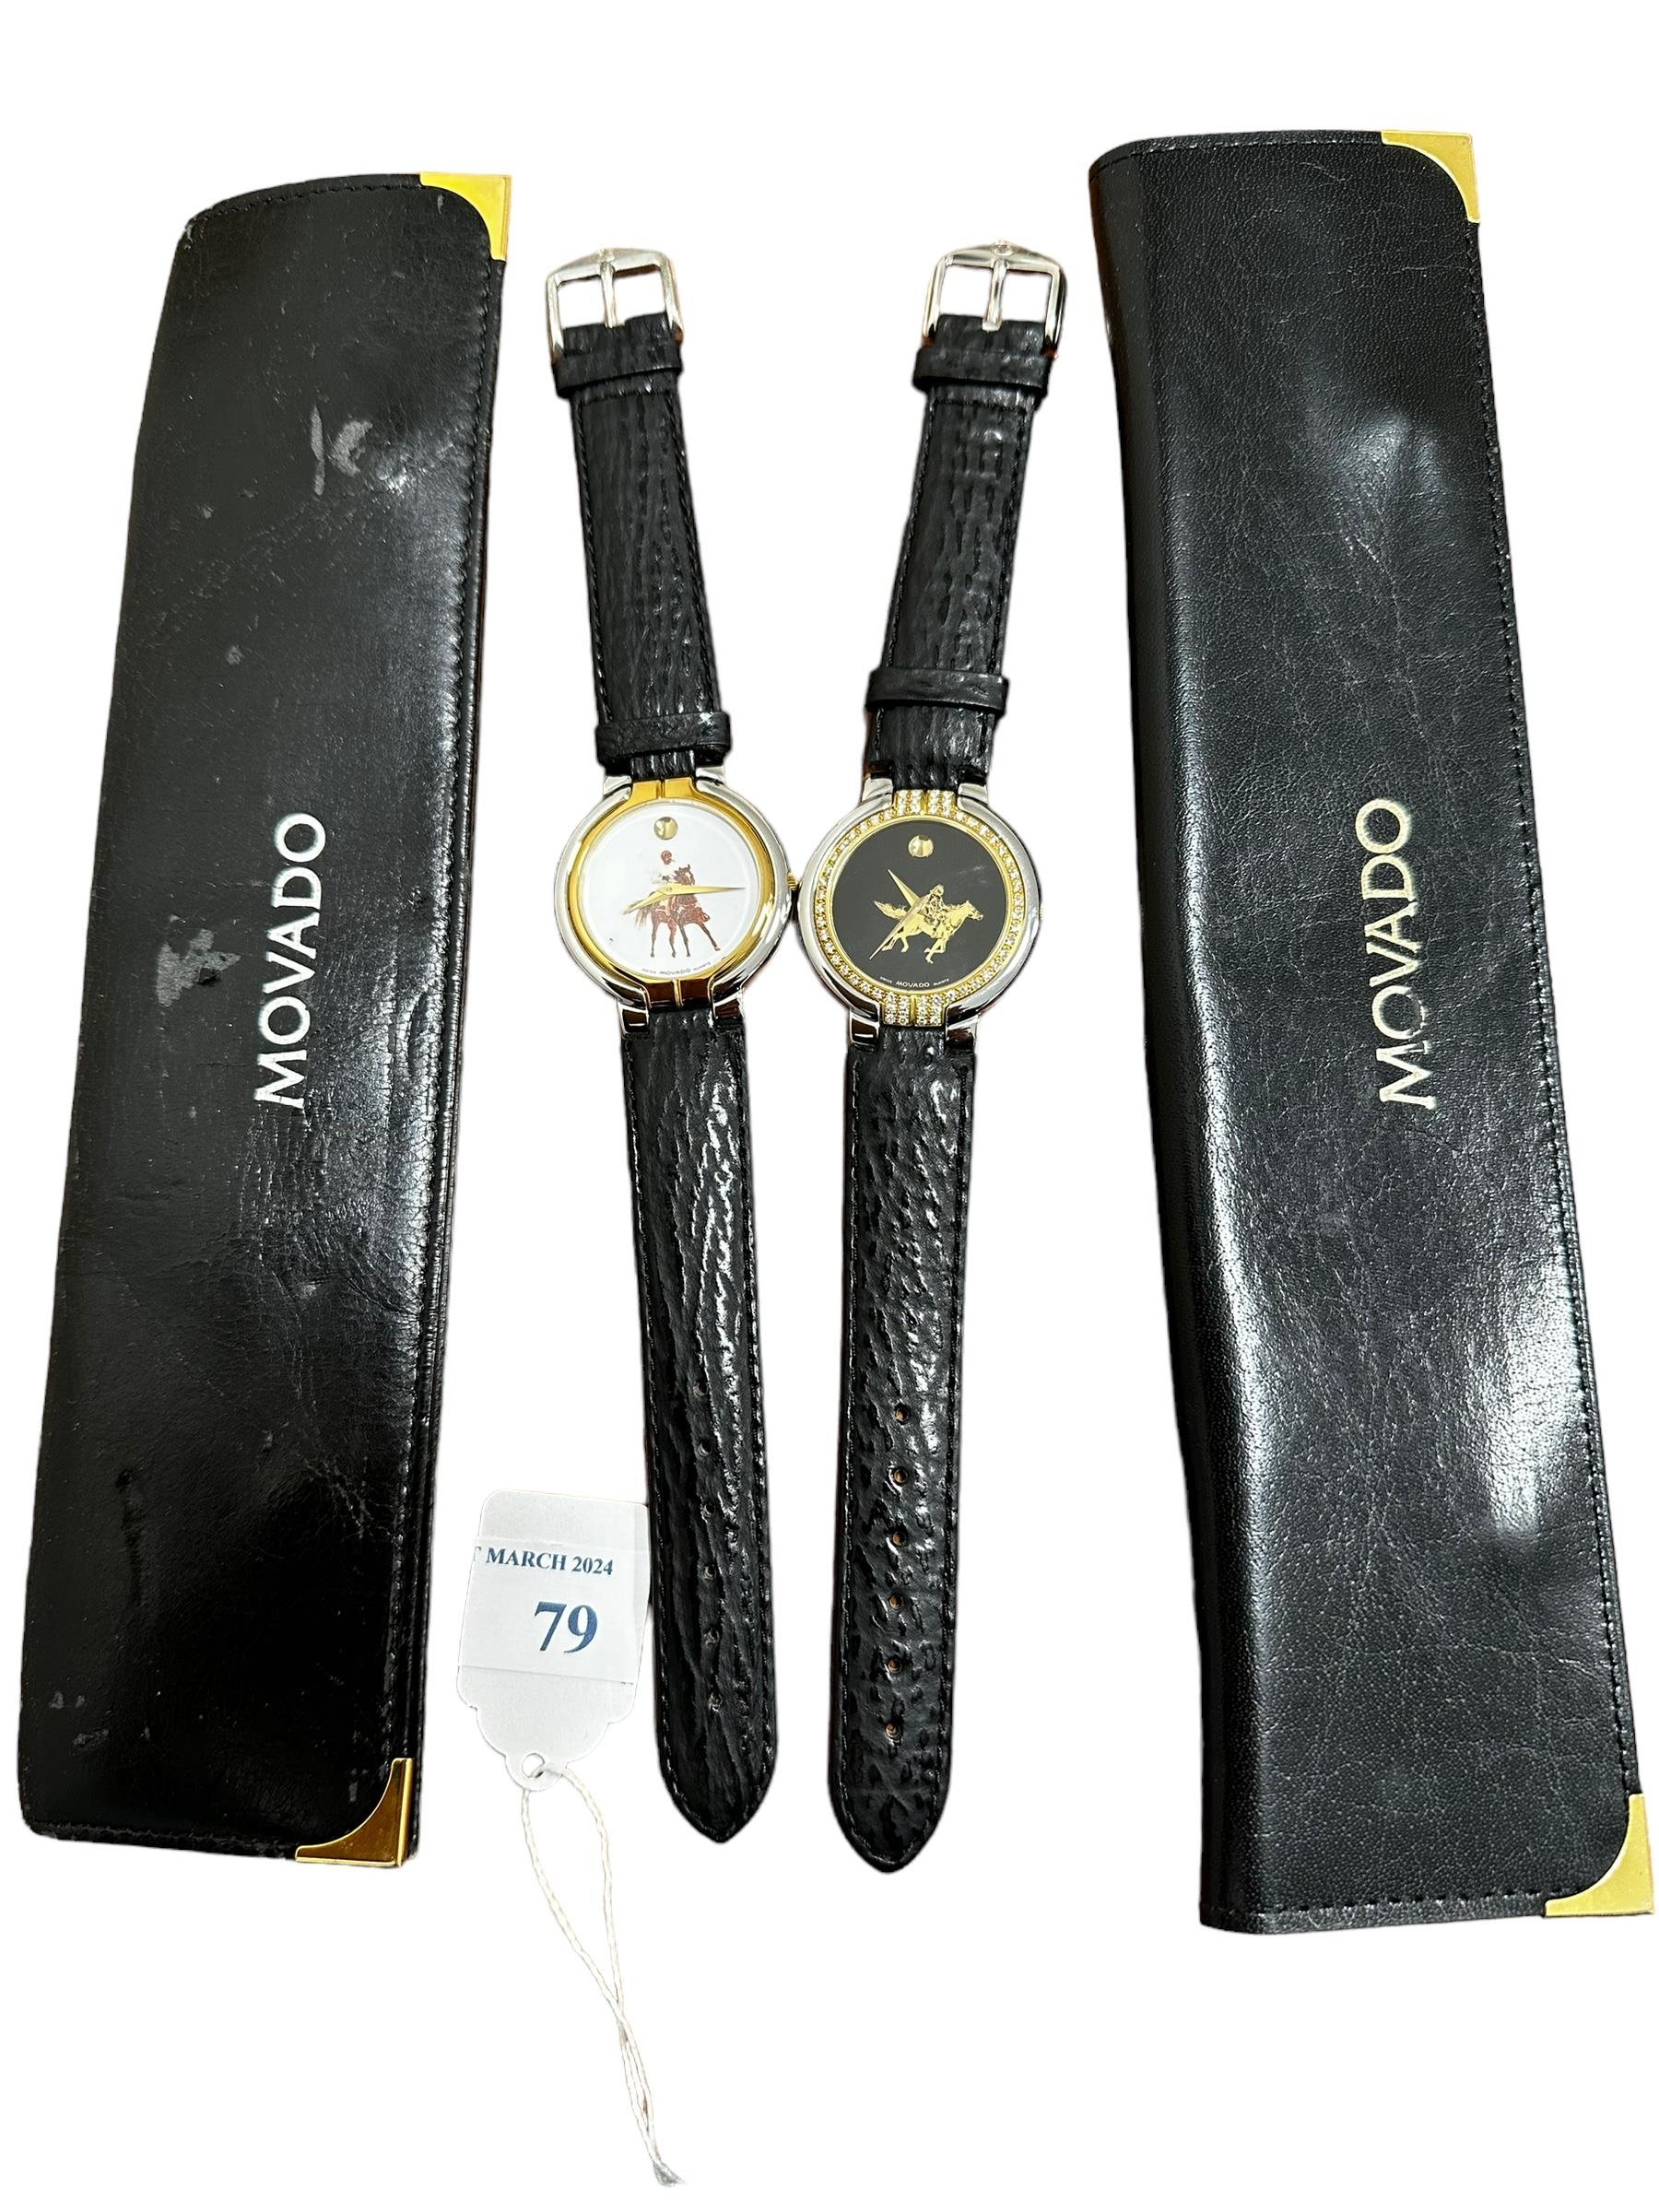 Two cased Swiss watches. Movado stamped to case, the watch face with images of racehorses